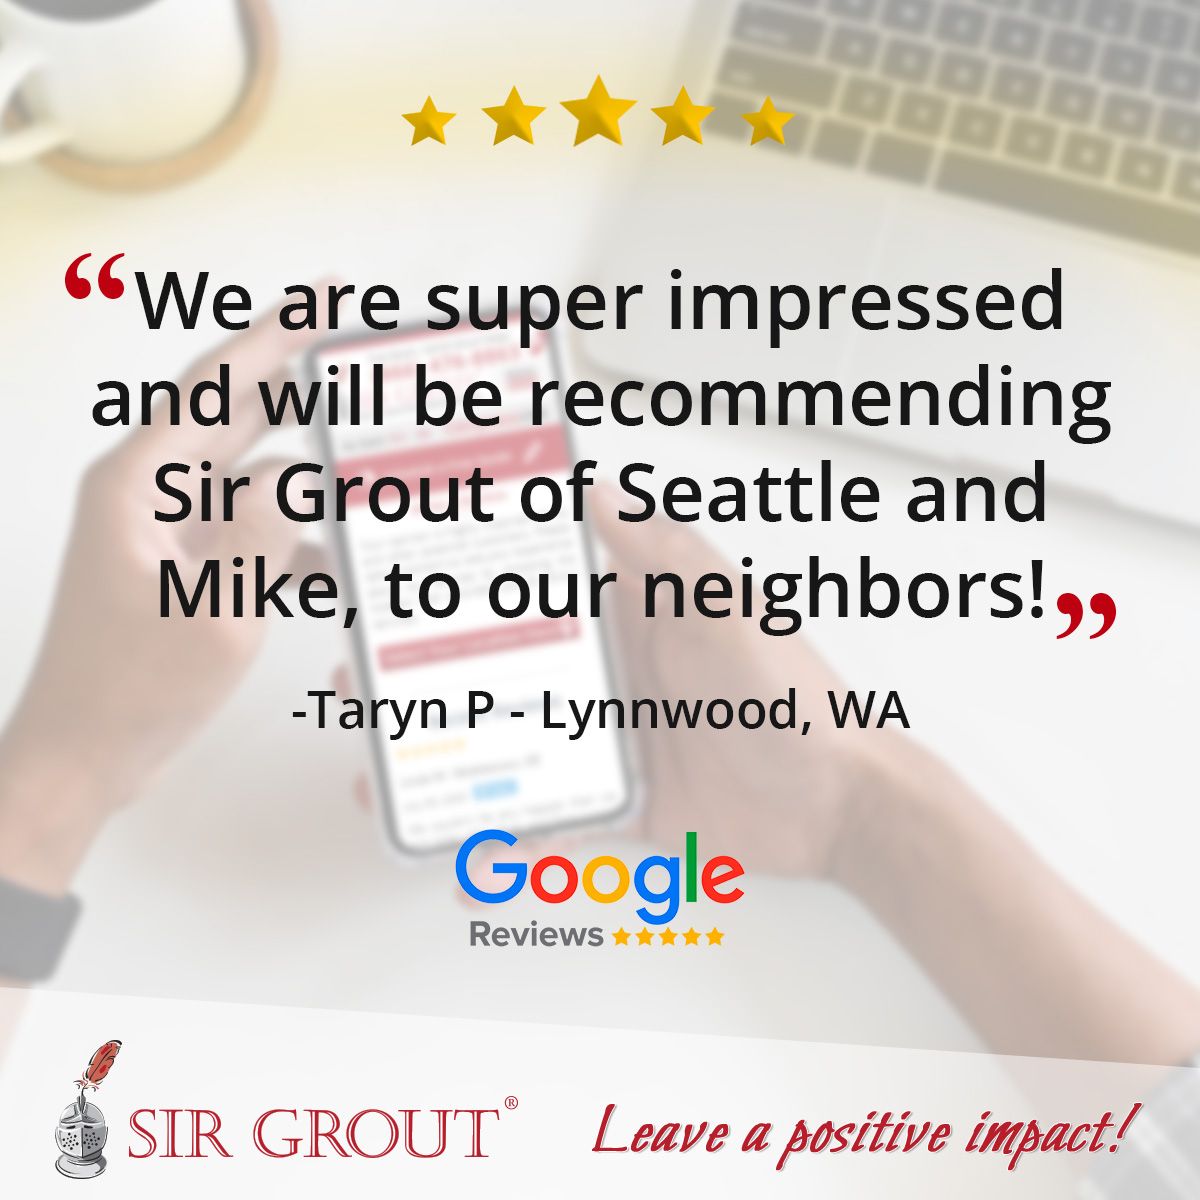 We are super impressed and will be recommending Sir Grout of Seattle and Mike, to our neighbors